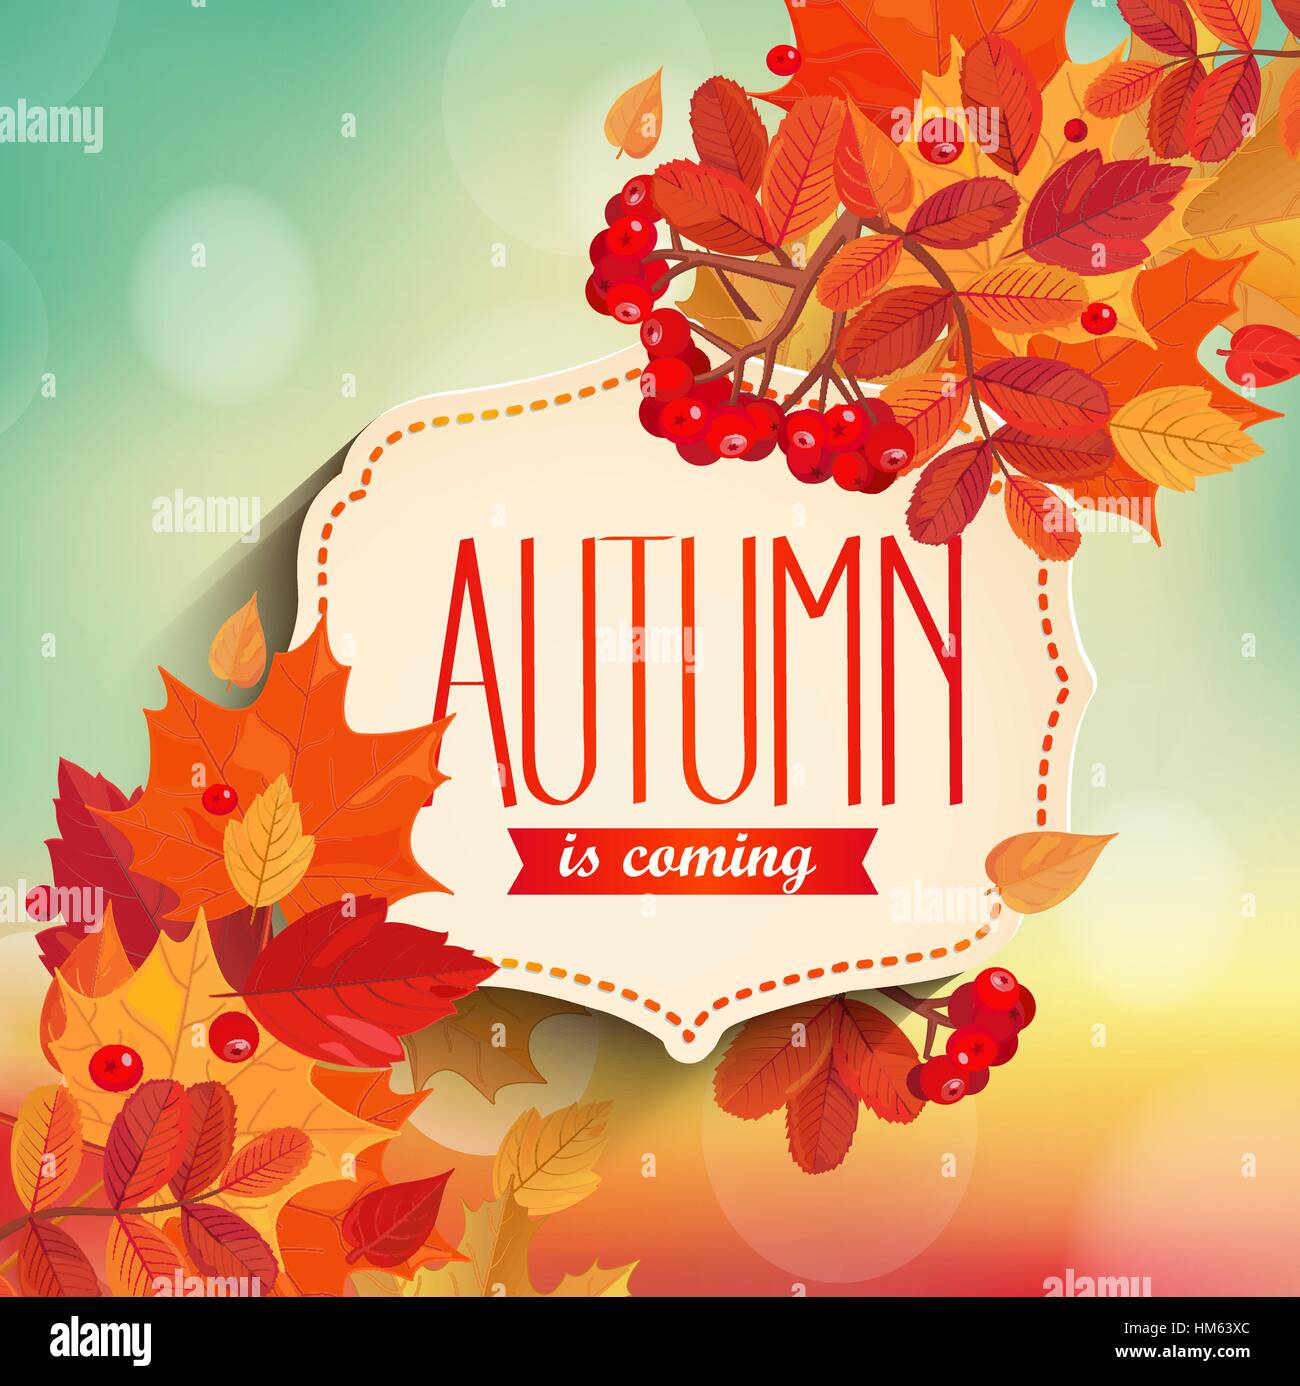 Autumn is coming - background with colorful leaves and vintage frame with text. EPS 10 vector illustration. Stock Vector